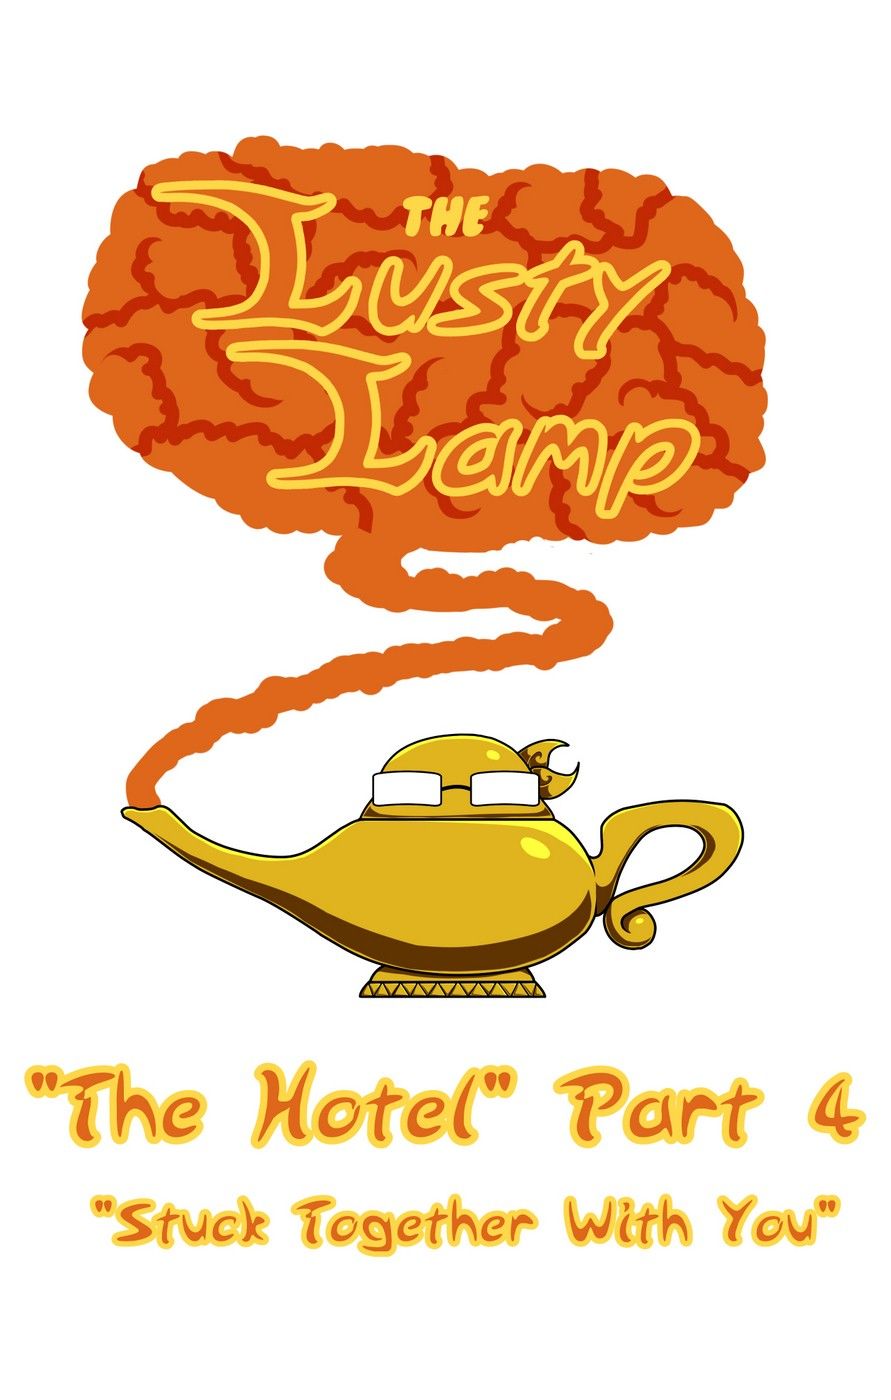 The Lusty Lamp - The Hotel Part 4 Stuck Together With You [Oxdaman] page 1